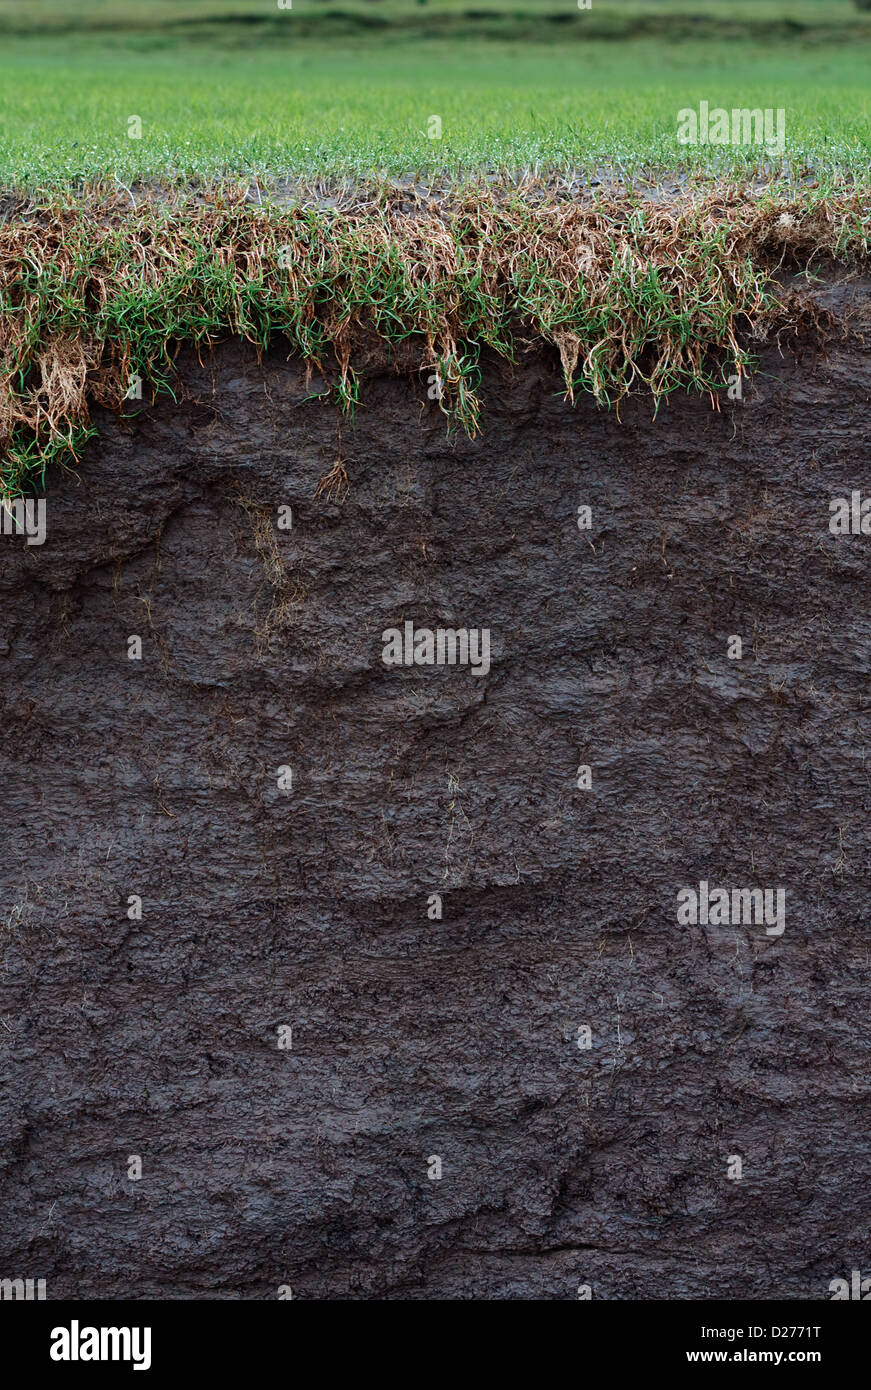 cross section of a salt marsh field with exposed soil following coastal erosion or landslide Stock Photo